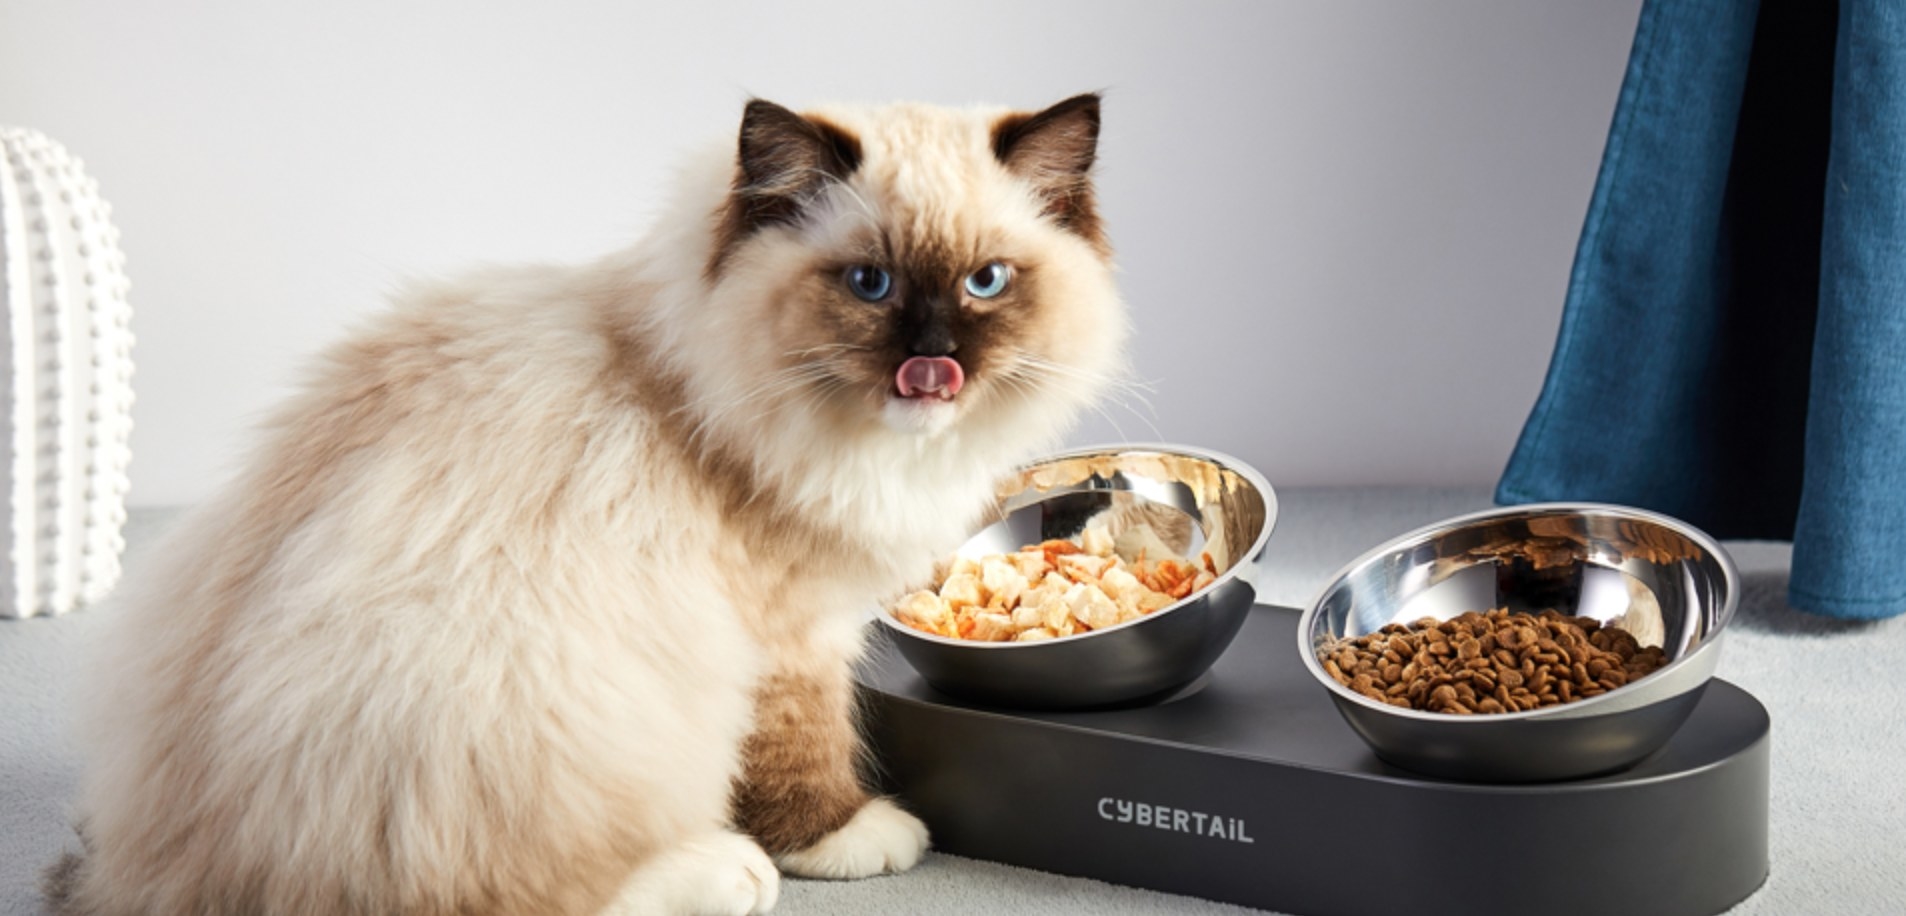 a cat licking its lips and standing next to the raised, tilted bowls